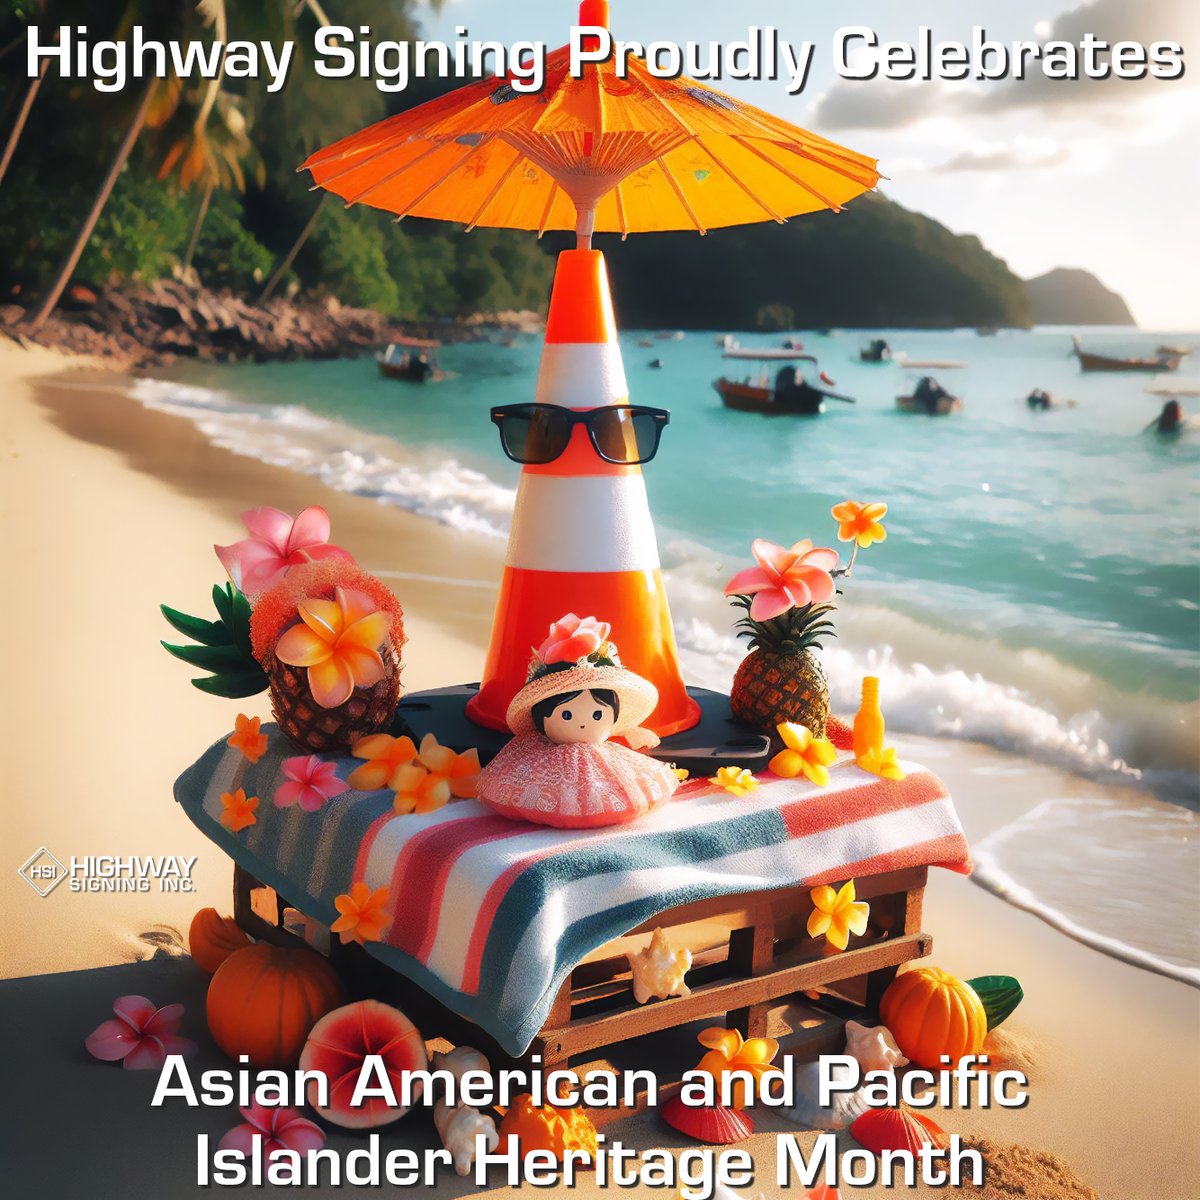 Let's celebrate the rich tapestry of cultures that drive our community forward. Here’s to the vibrant traditions and contributions of AAPI individuals who enrich our nation. 
#AAPI #AAPIHistoryMonth #AAPIHeritageMonth #AAPIMonth #HighwaySigningInc  #construction #transportation